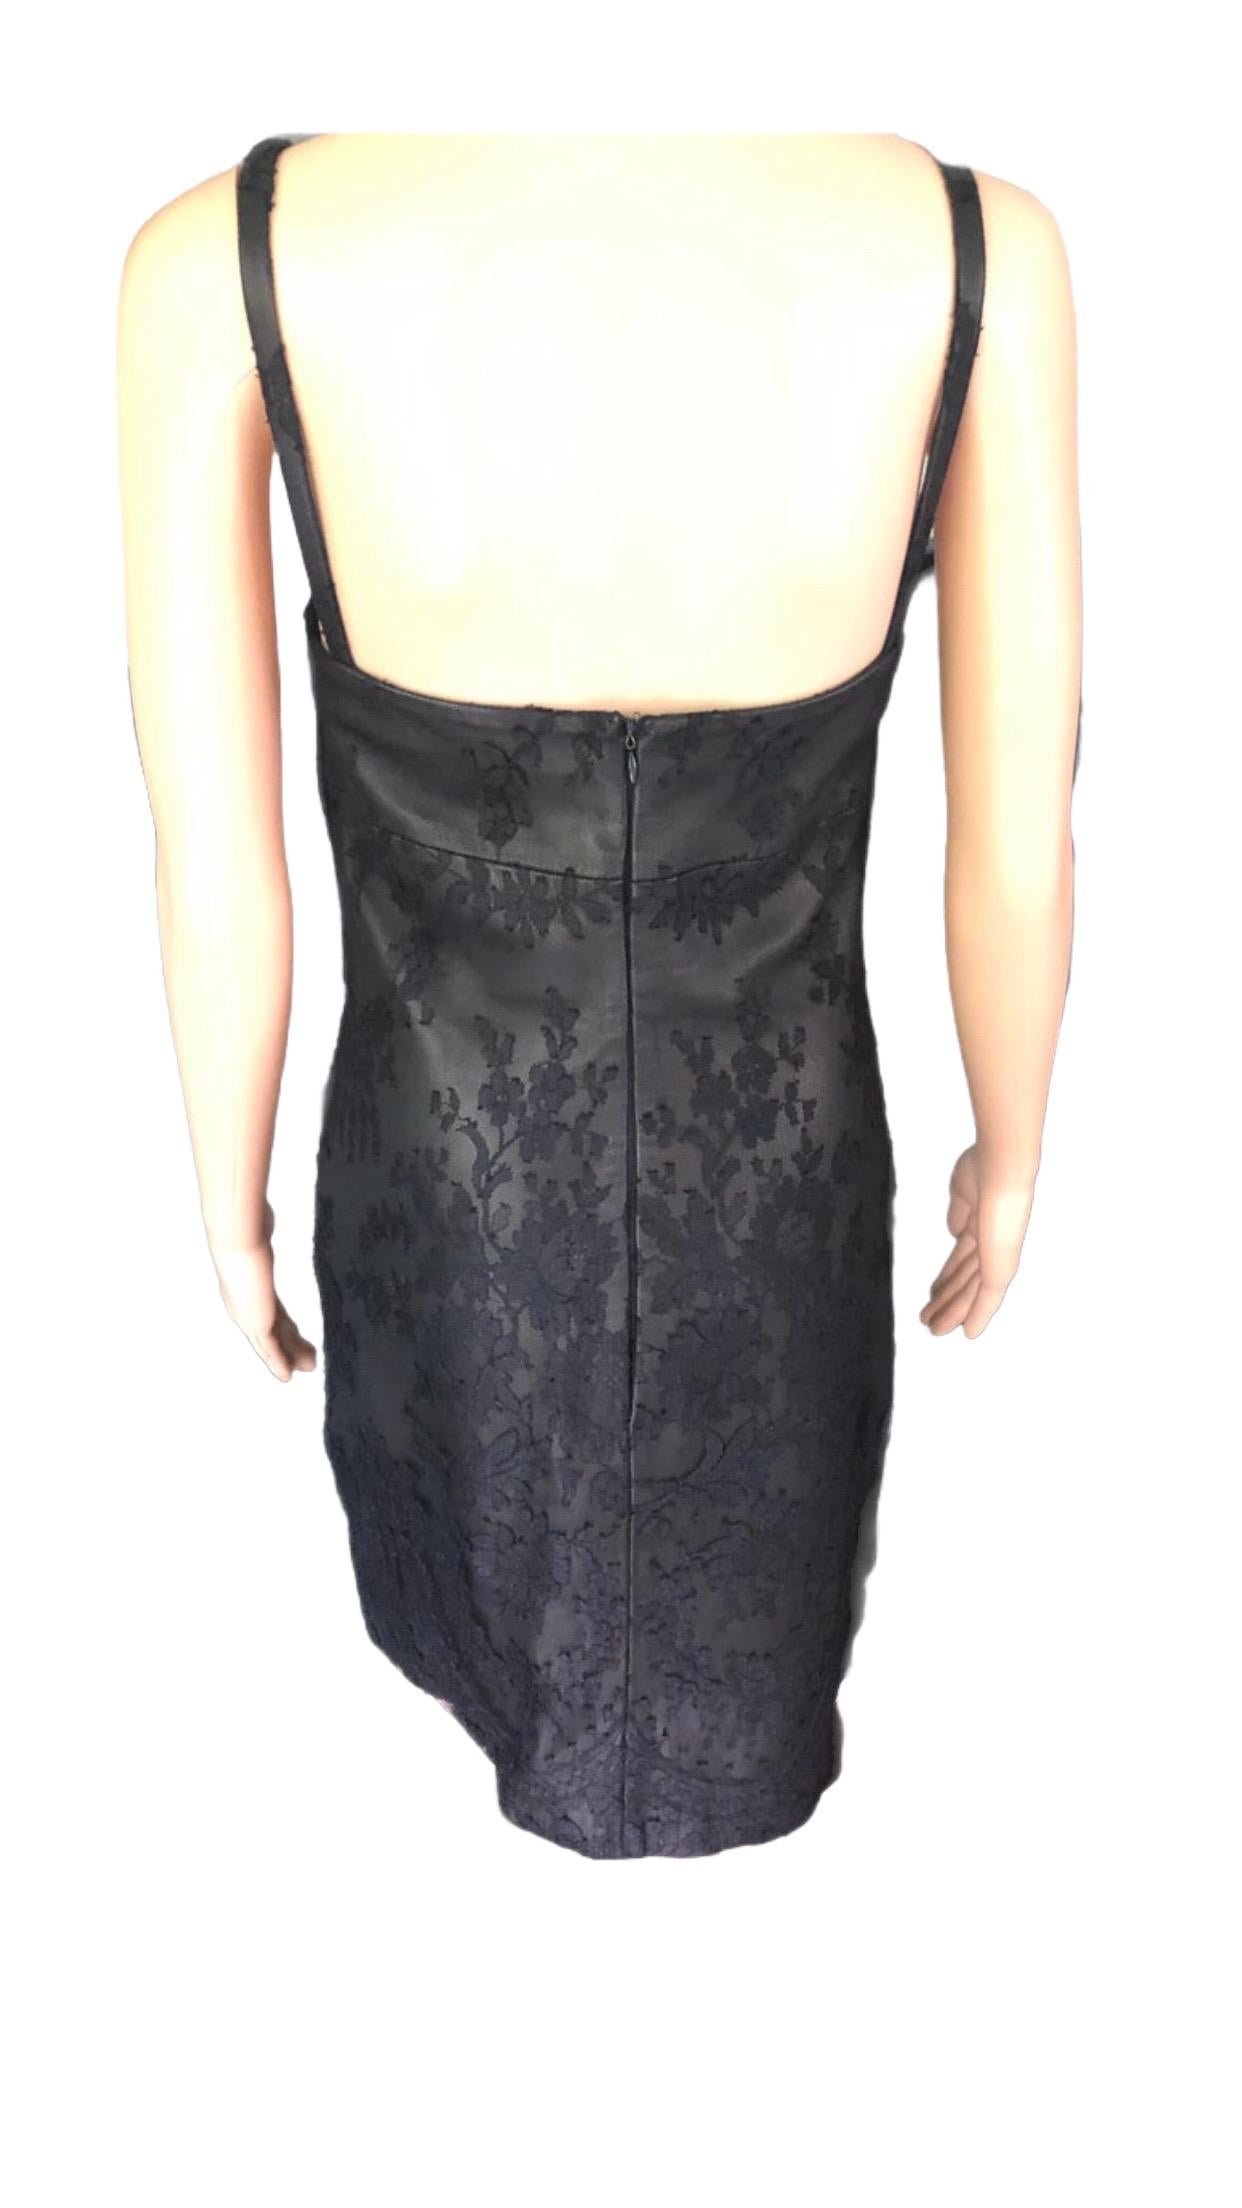 Gianni Versace F/W 1996 Vintage Lace and Leather Black Mini Dress  For Sale 7